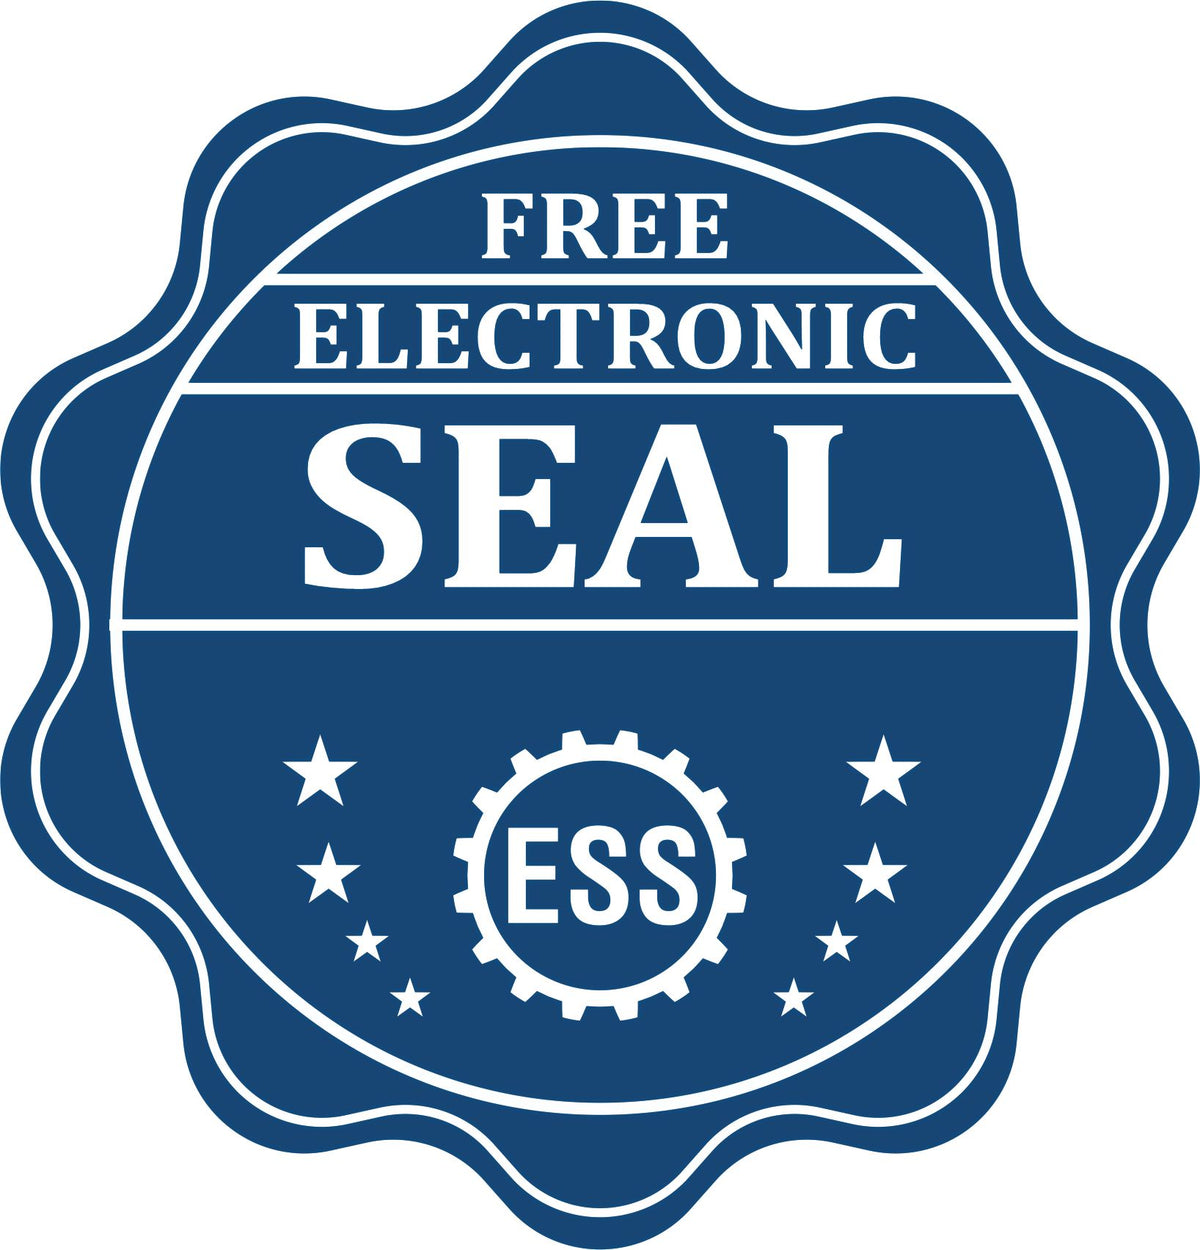 A badge showing a free electronic seal for the Heavy-Duty Kentucky Rectangular Notary Stamp with stars and the ESS gear on the emblem.